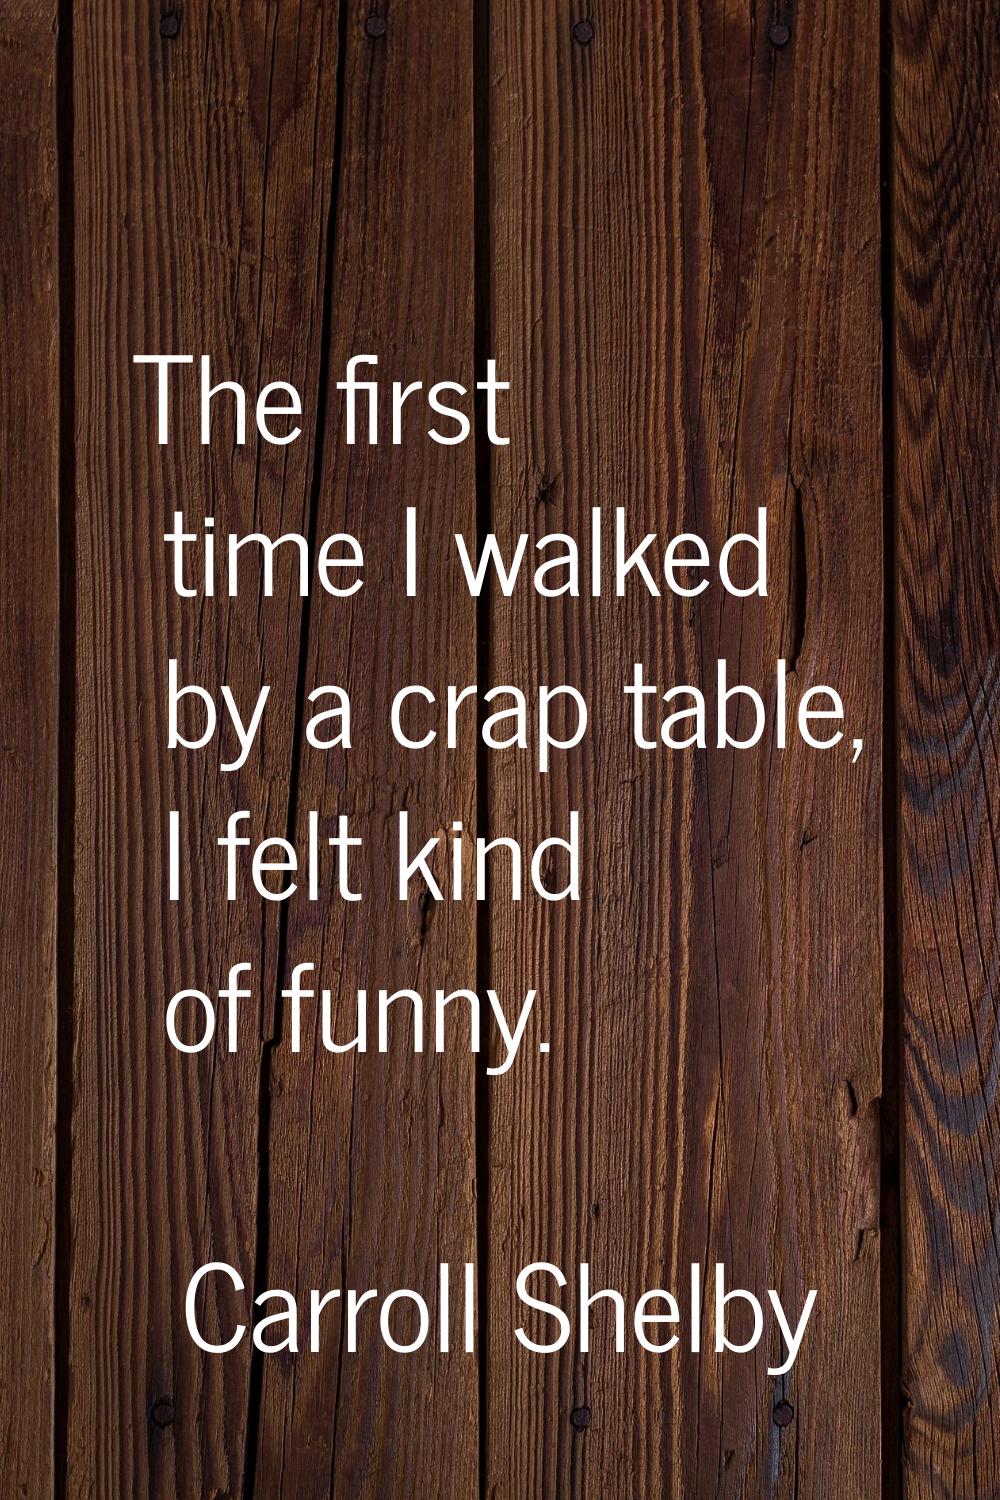 The first time I walked by a crap table, I felt kind of funny.